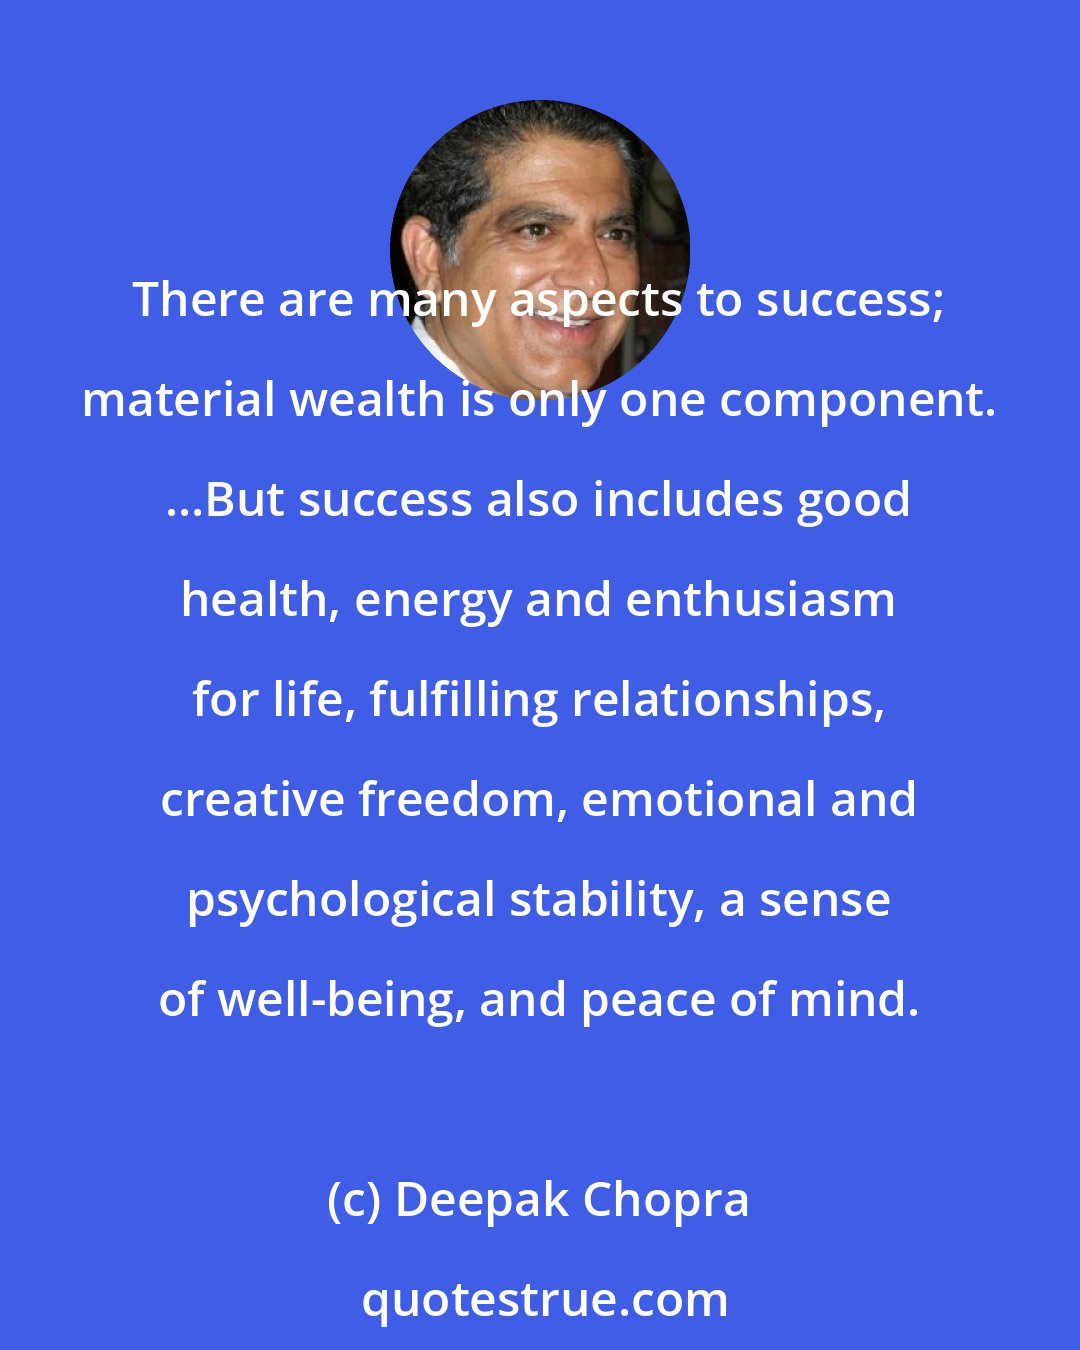 Deepak Chopra: There are many aspects to success; material wealth is only one component. ...But success also includes good health, energy and enthusiasm for life, fulfilling relationships, creative freedom, emotional and psychological stability, a sense of well-being, and peace of mind.